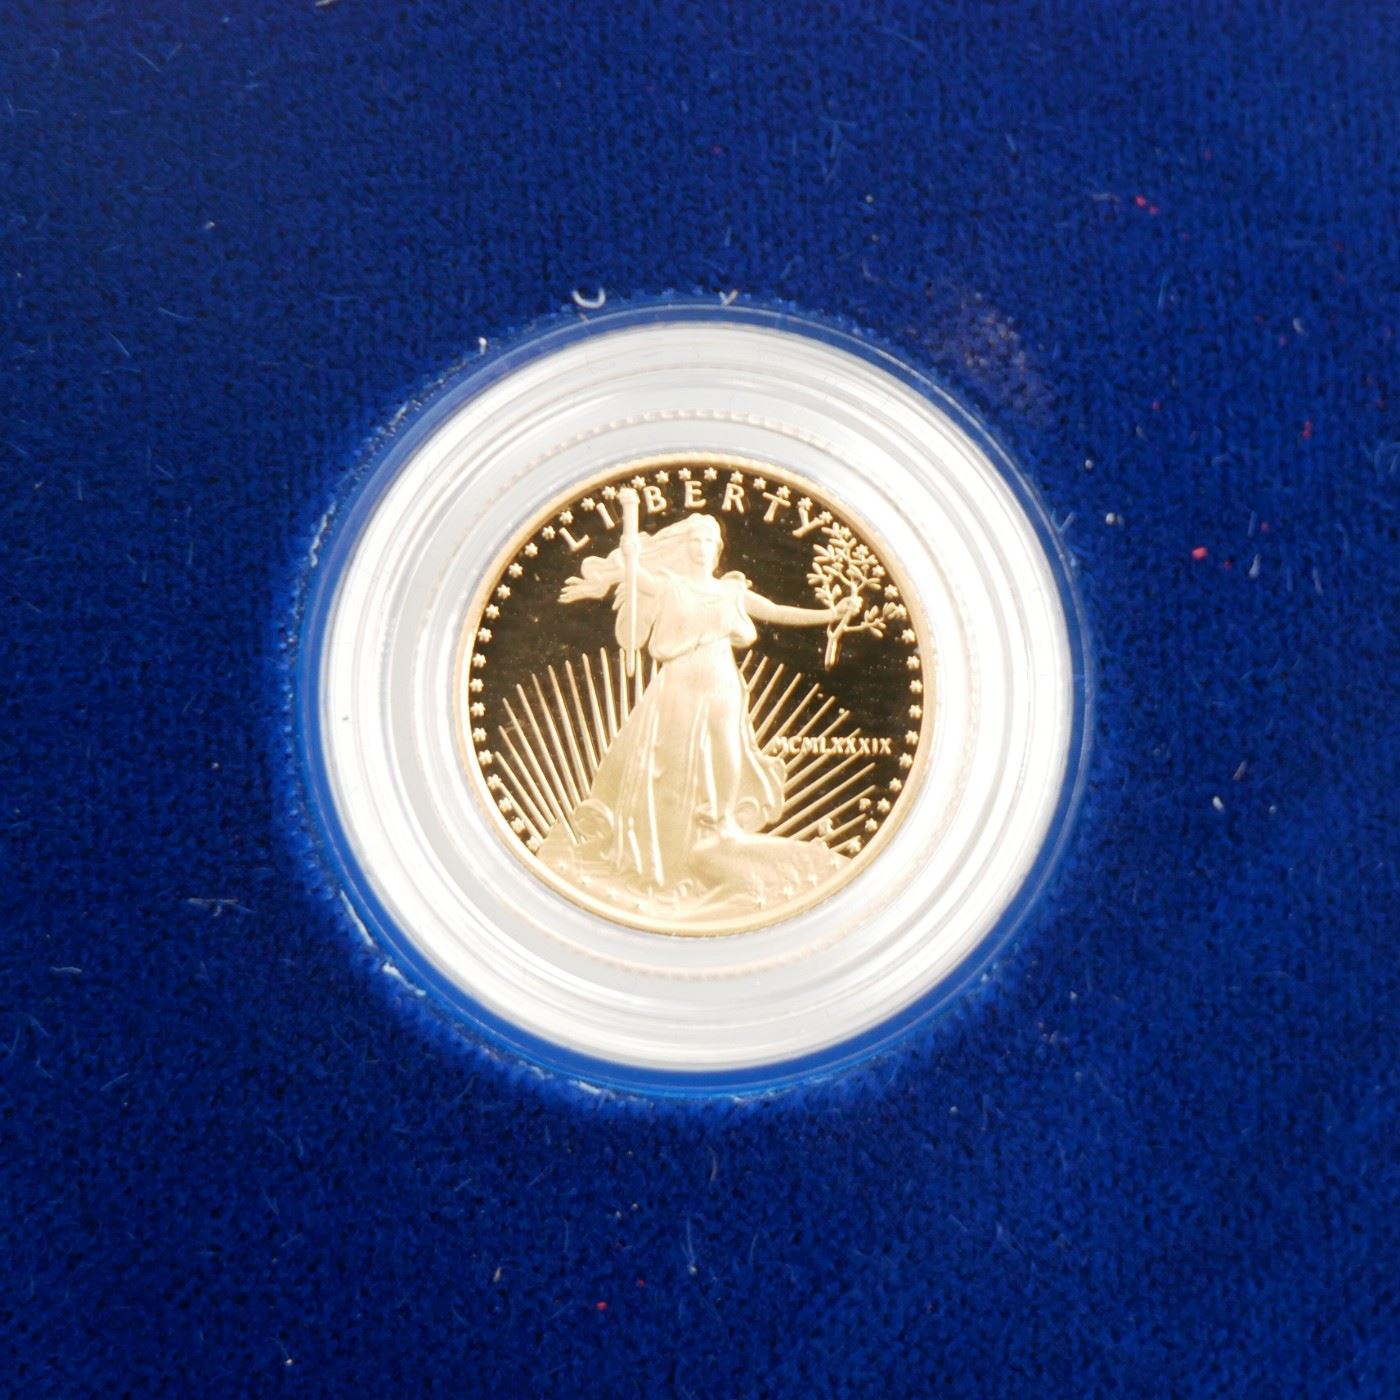 1989-P American Eagle One-Tenth Ounce Proof Gold Bullion Coin 